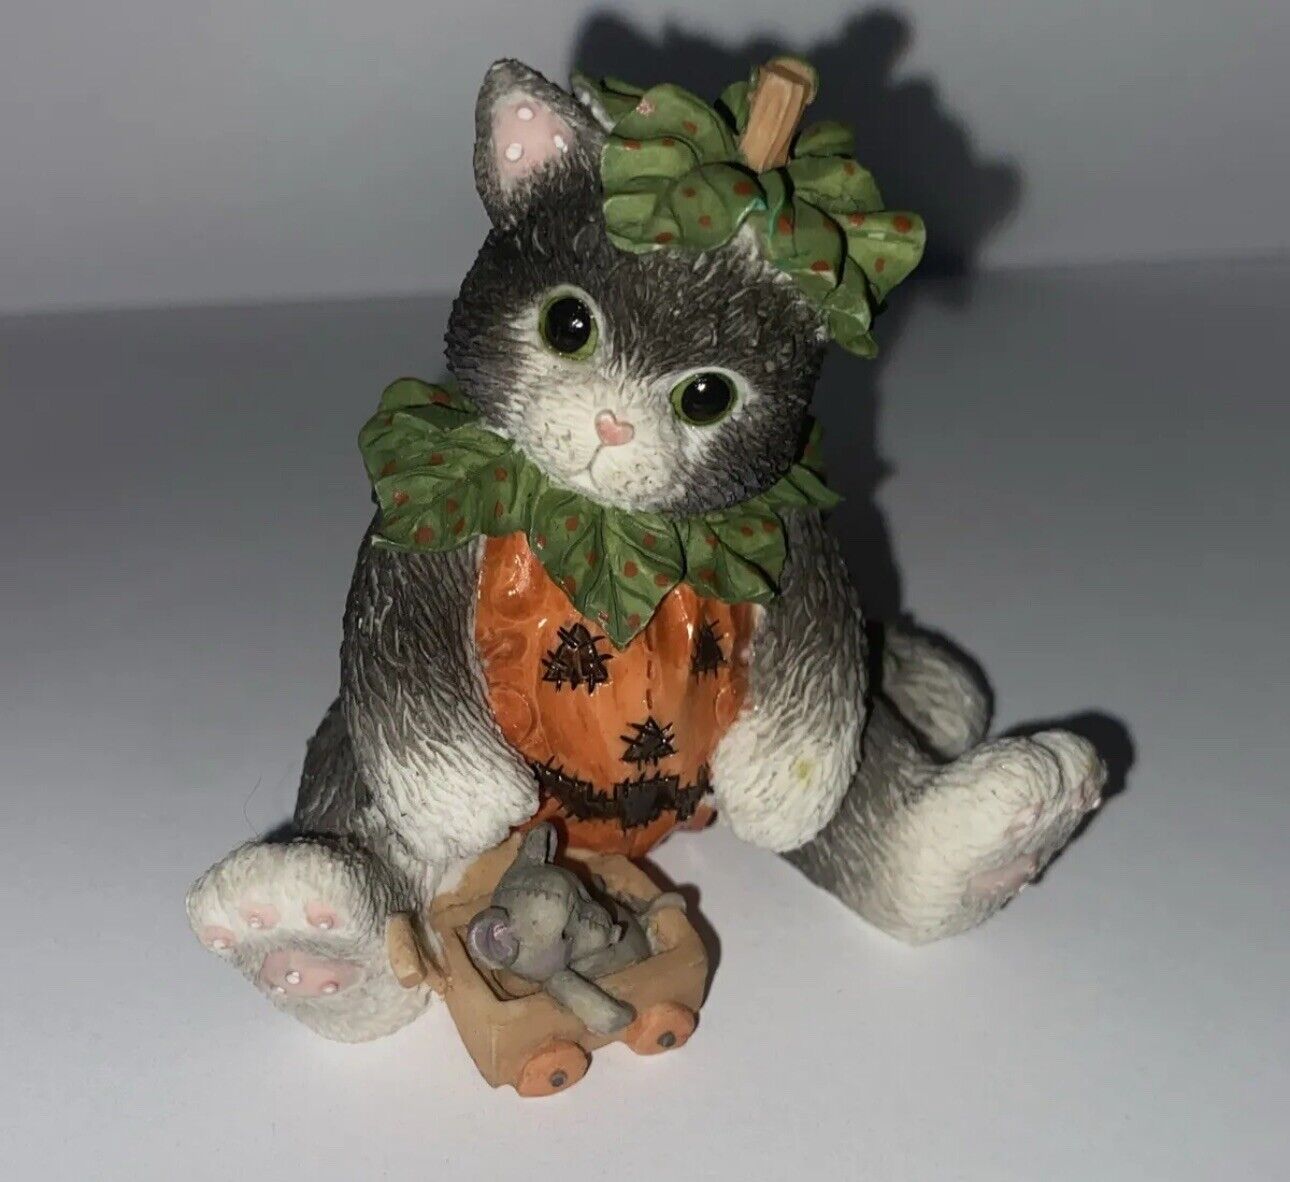 Enesco Calico Kittens “We’ve Carved A Perfect Friendship” Cat Halloween Figurine